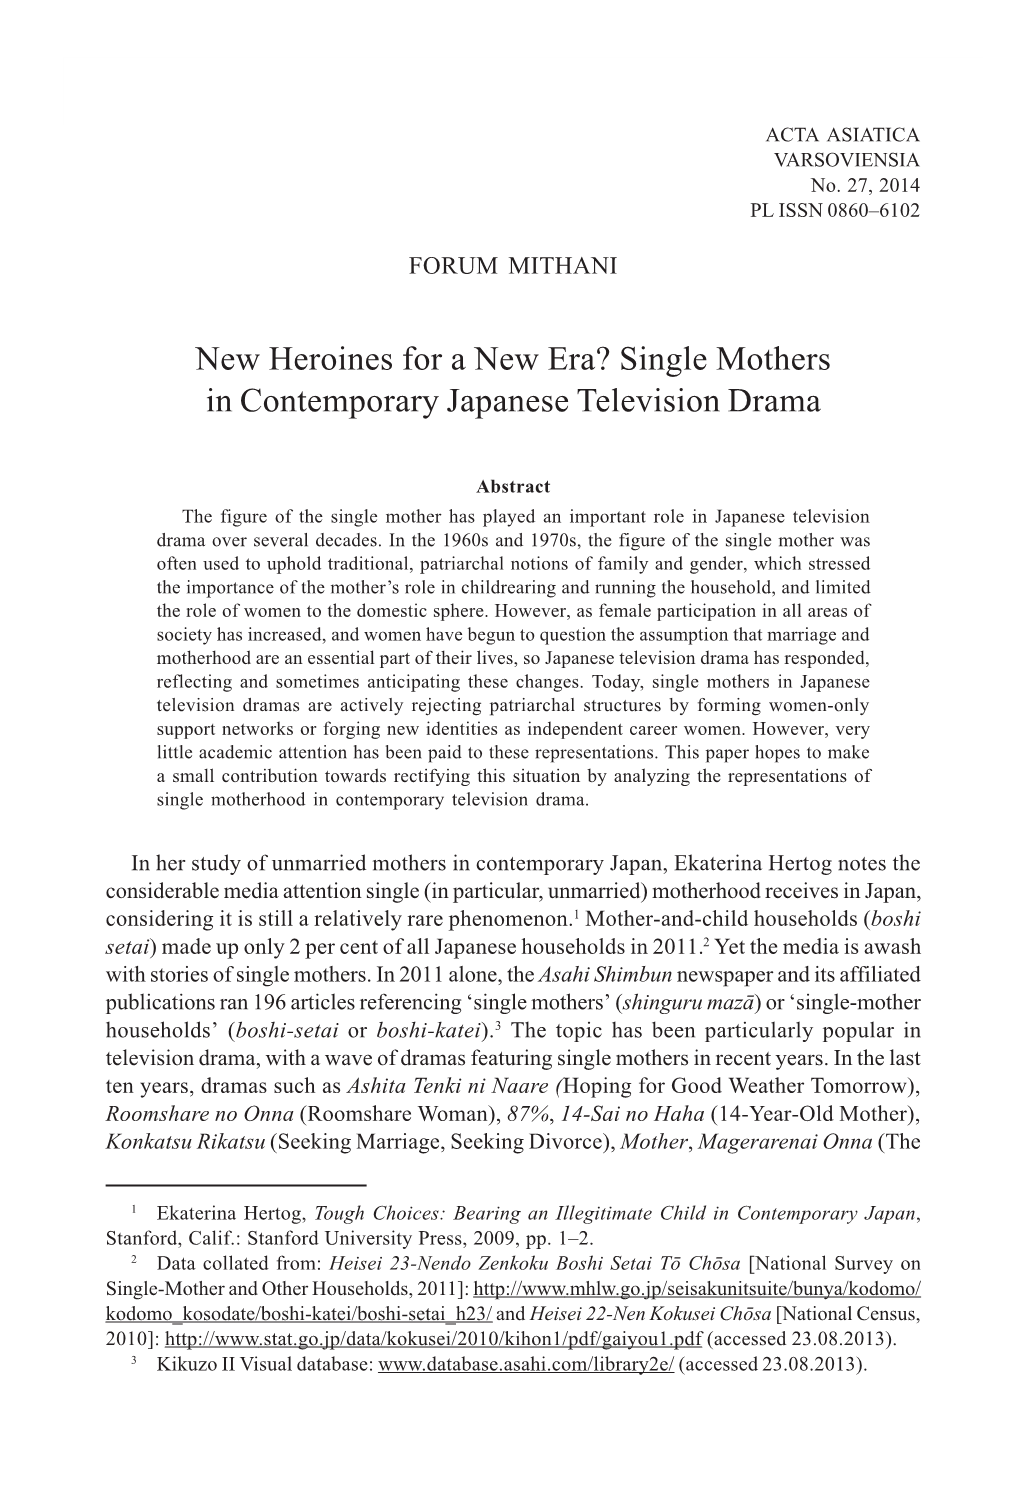 Single Mothers in Contemporary Japanese Television Drama 1